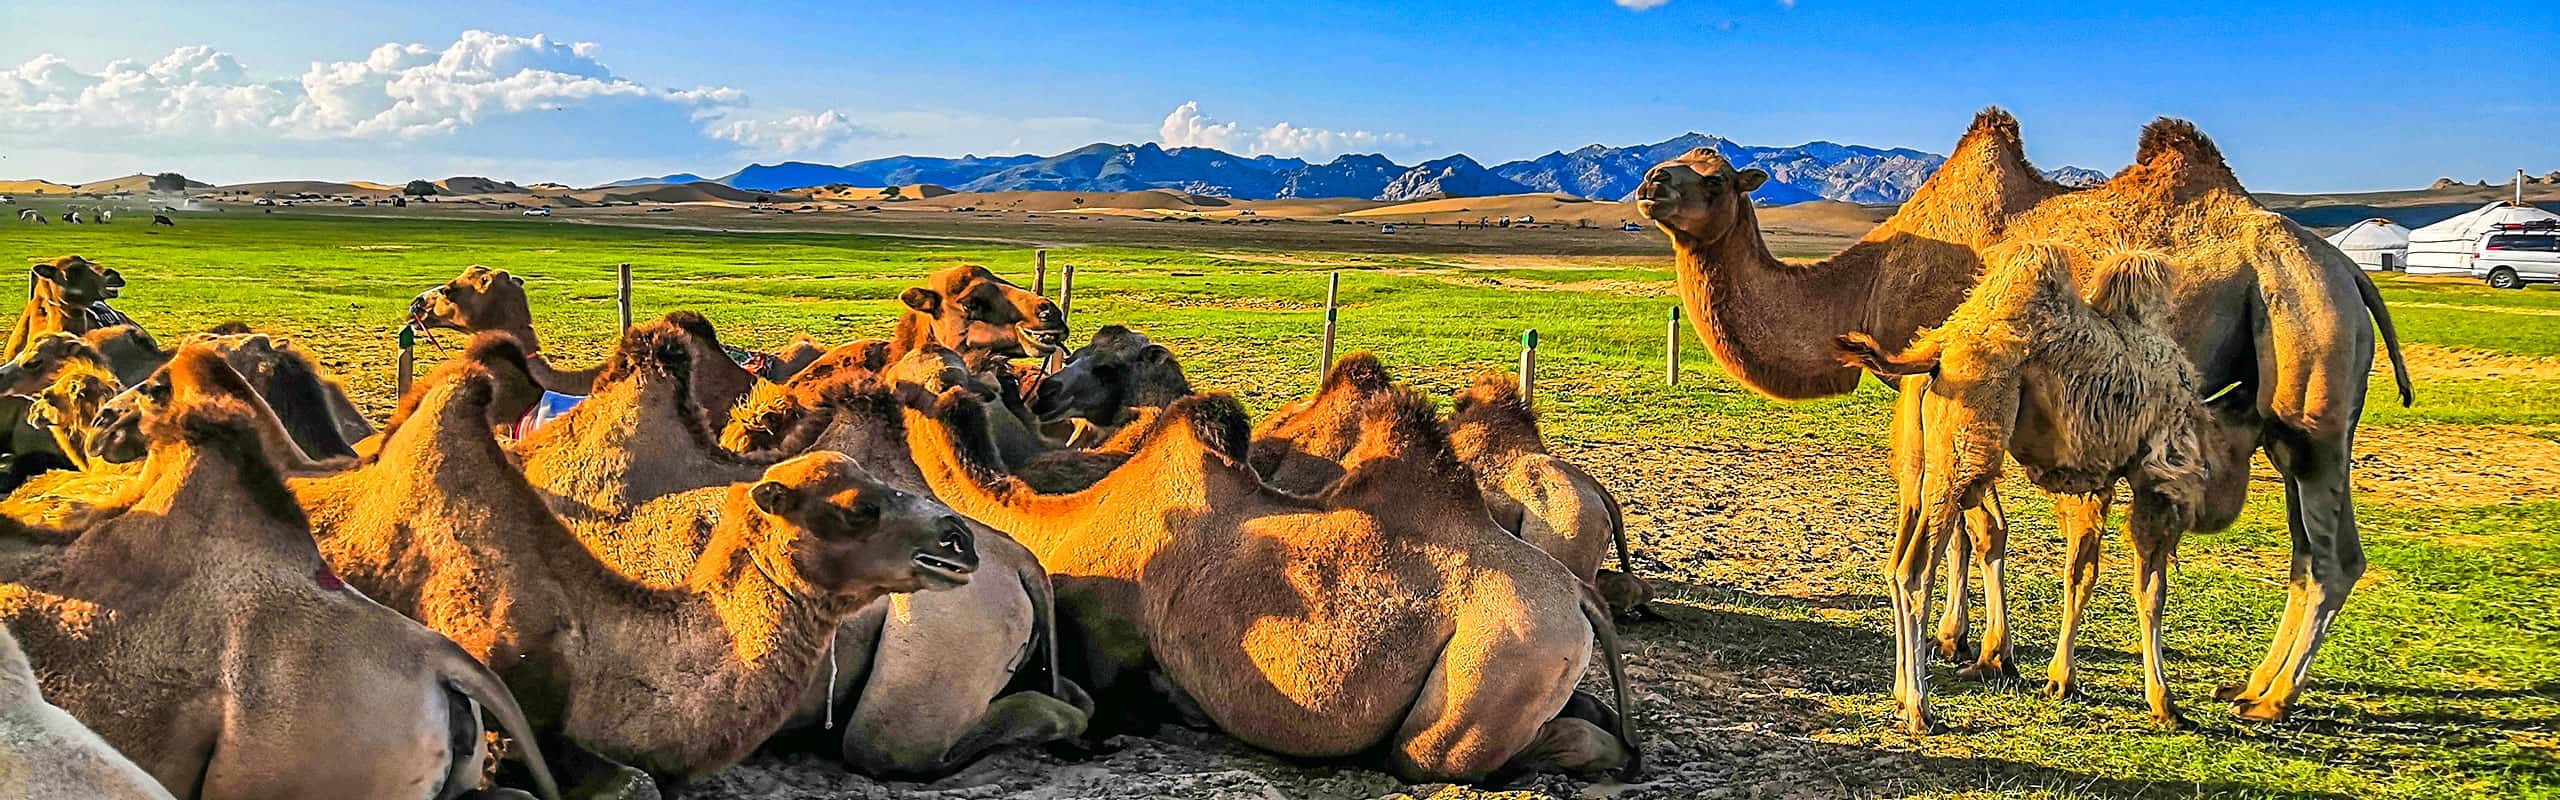 Camels on Mongolian Steppe